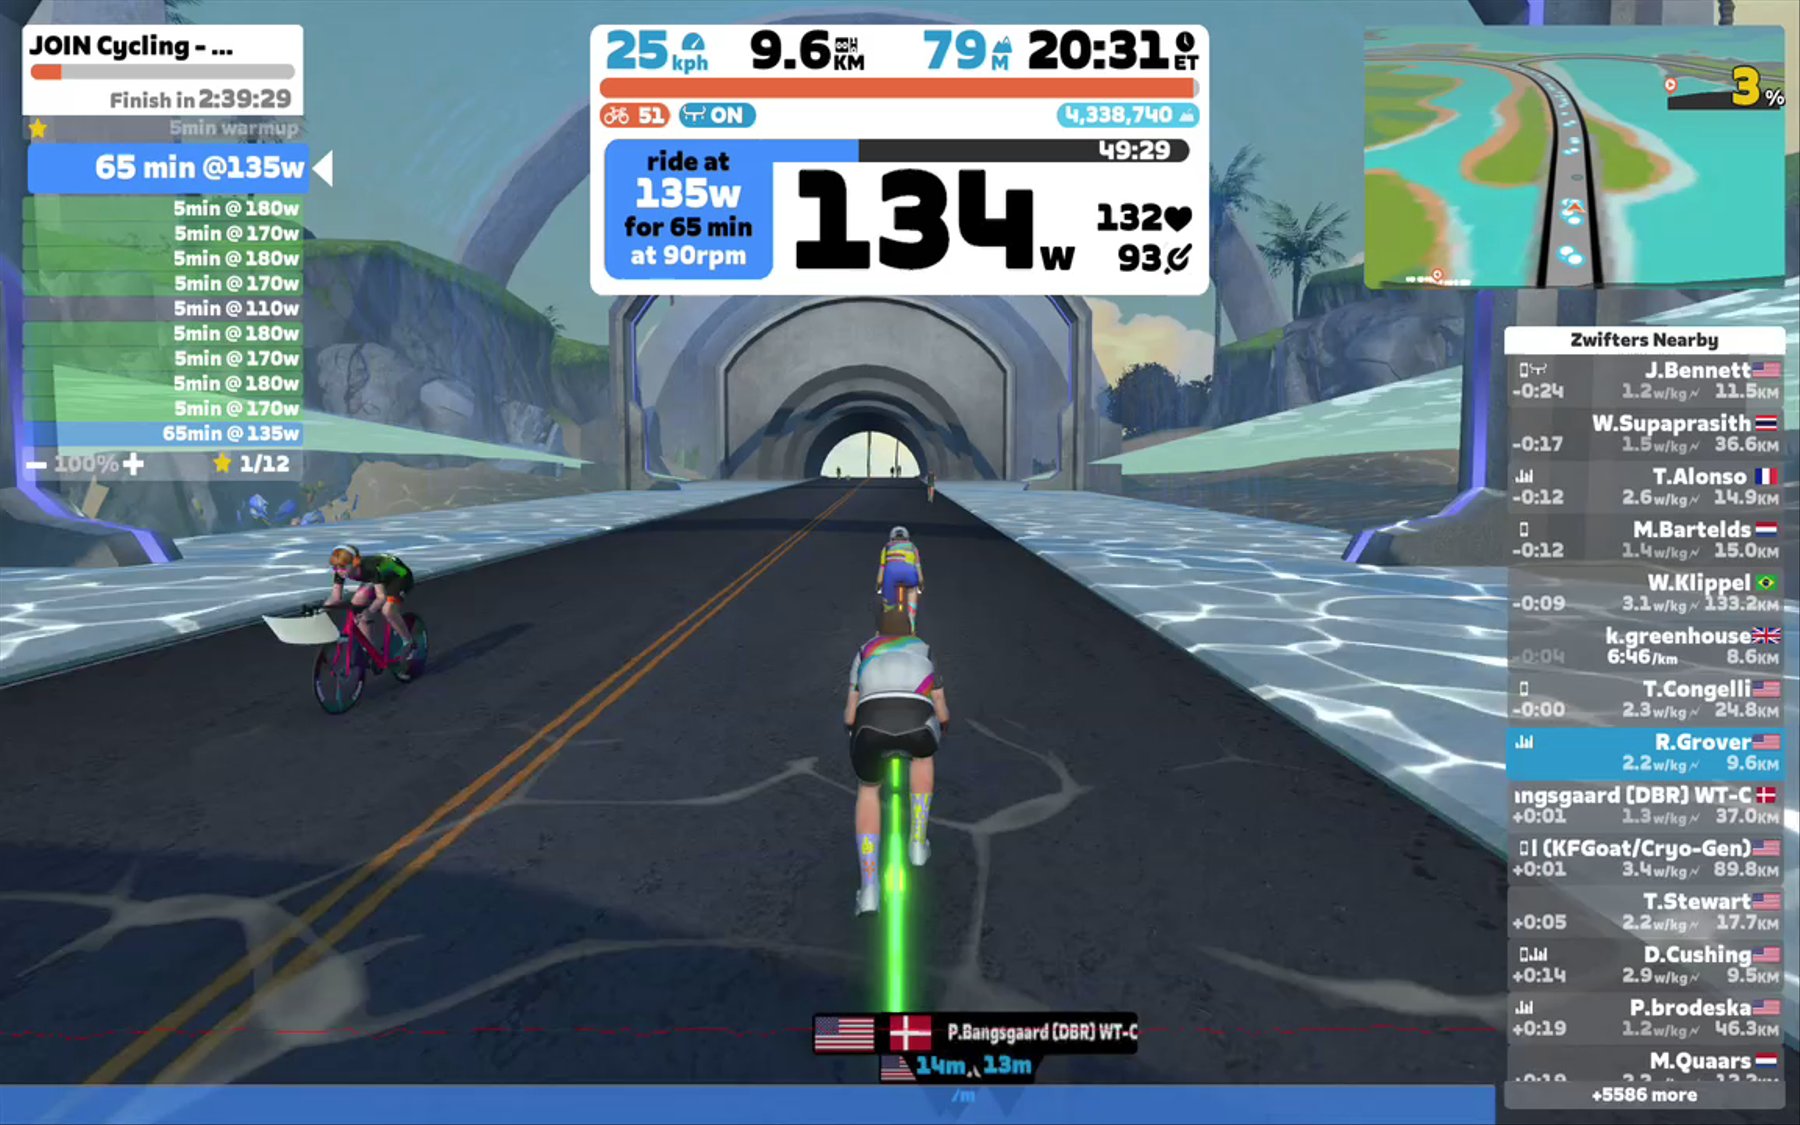 Zwift - JOIN Cycling - Sweet spot tempo in Watopia